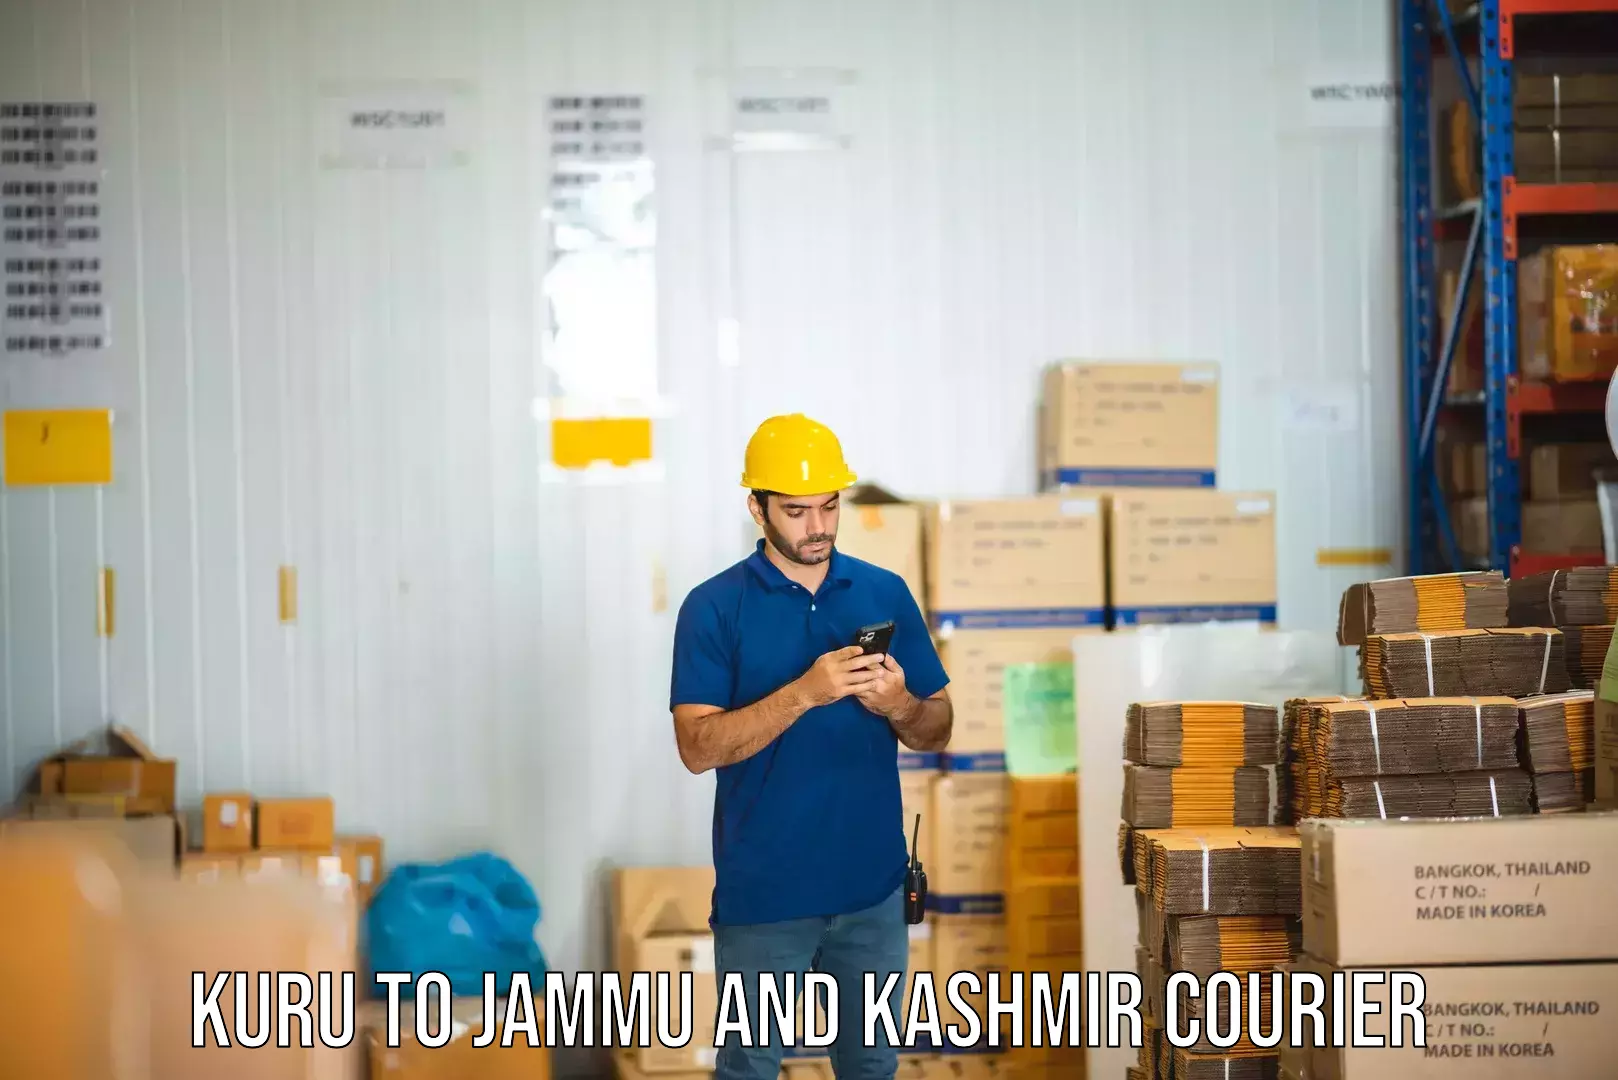 Advanced delivery network in Kuru to Jammu and Kashmir